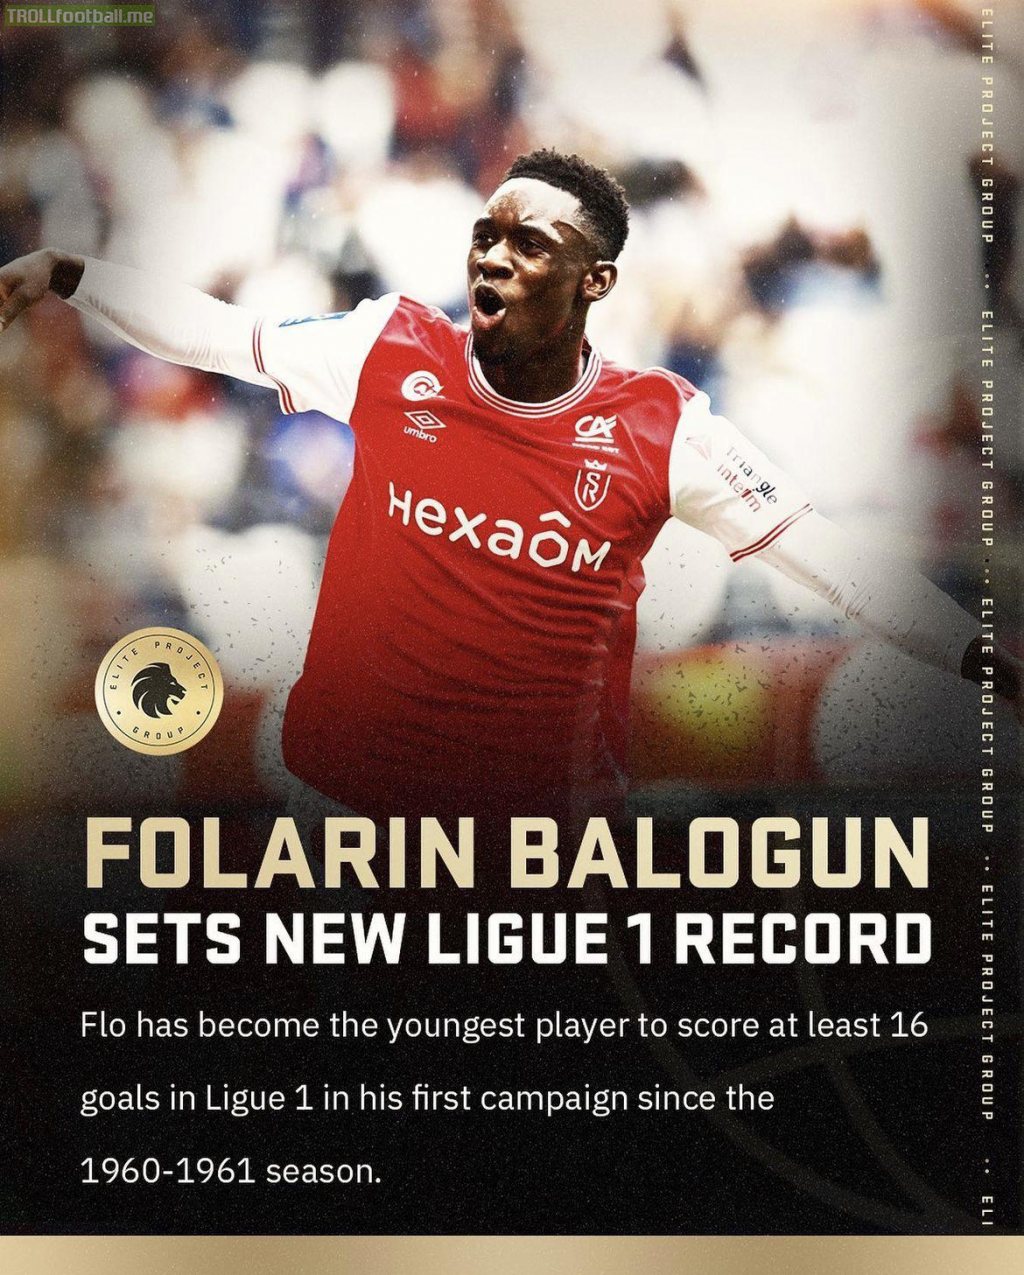 Folarin Balogun has become the youngest player to score at least 16 goals in the Ligue 1 in their debut campaign since the 1960-61 season